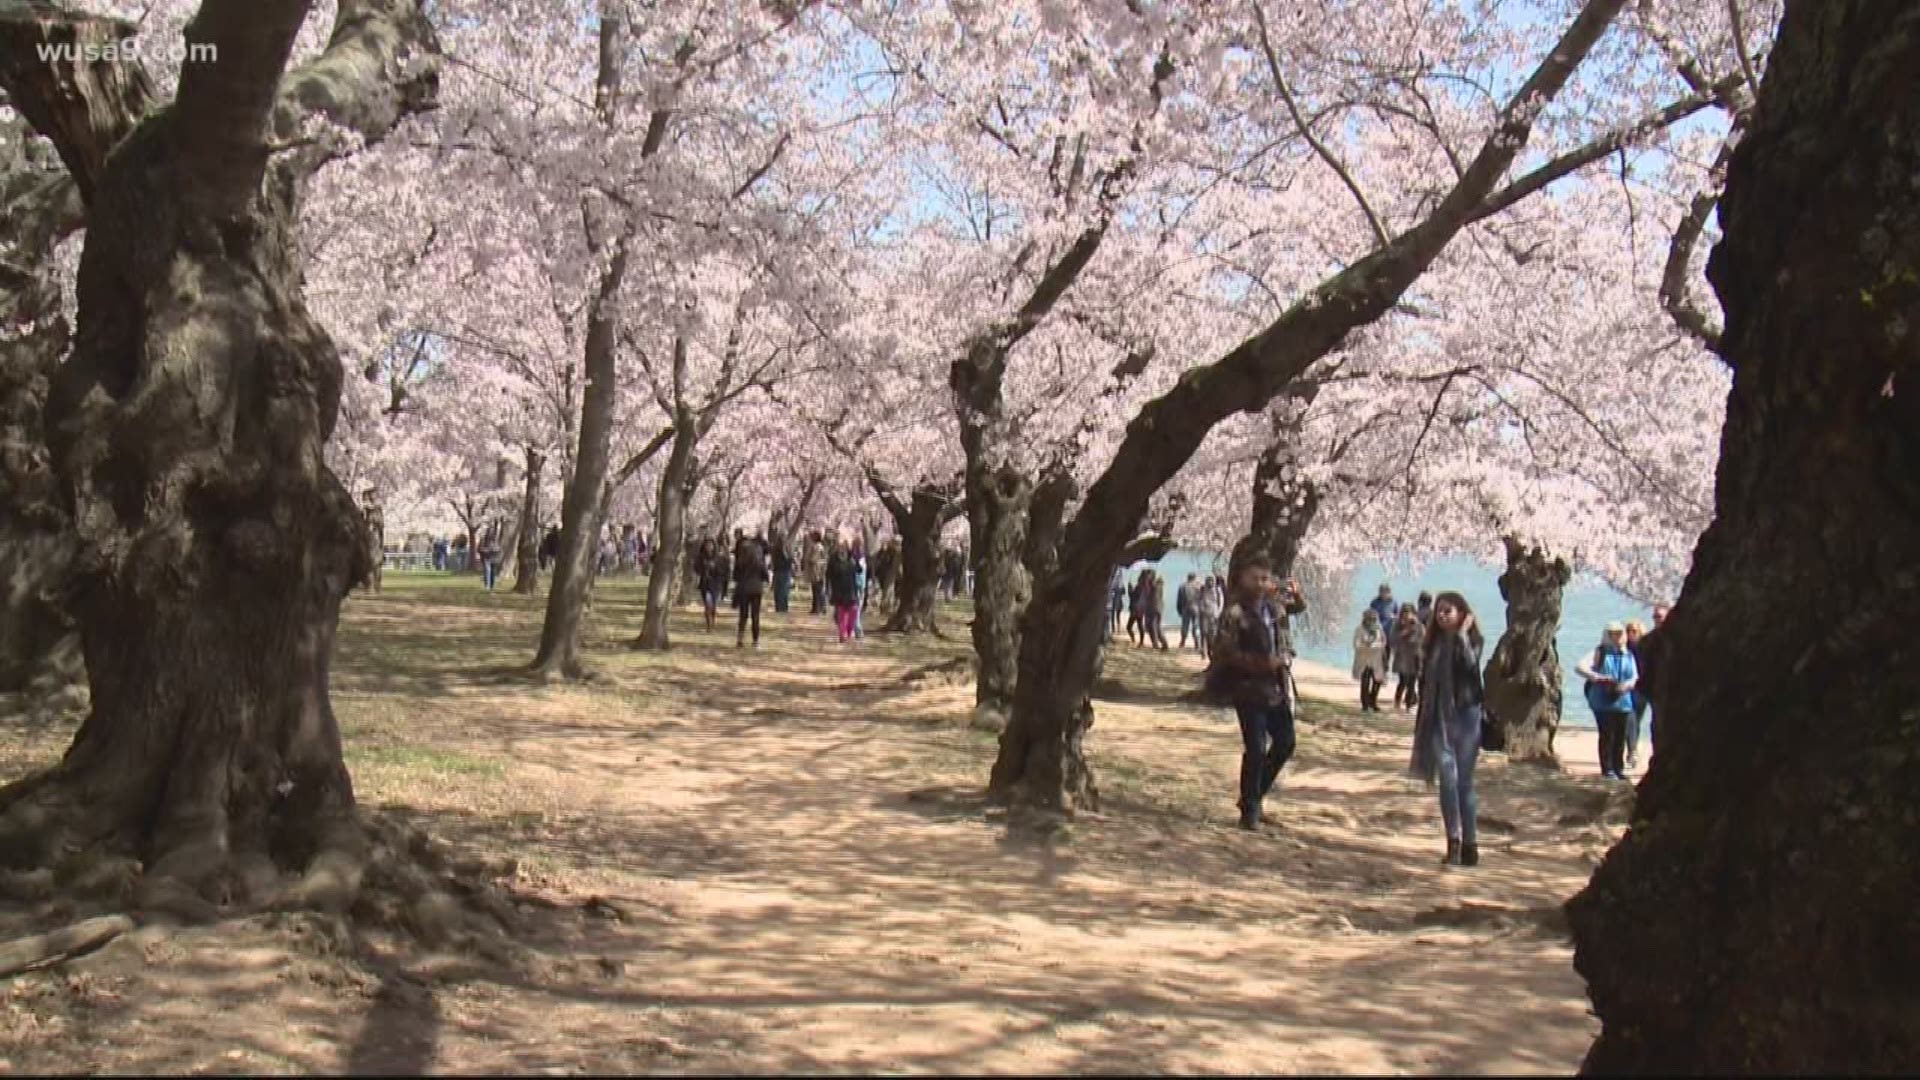 The National Cherry Blossom Festival posted changes to the schedule following a state of emergency being declared for D.C.